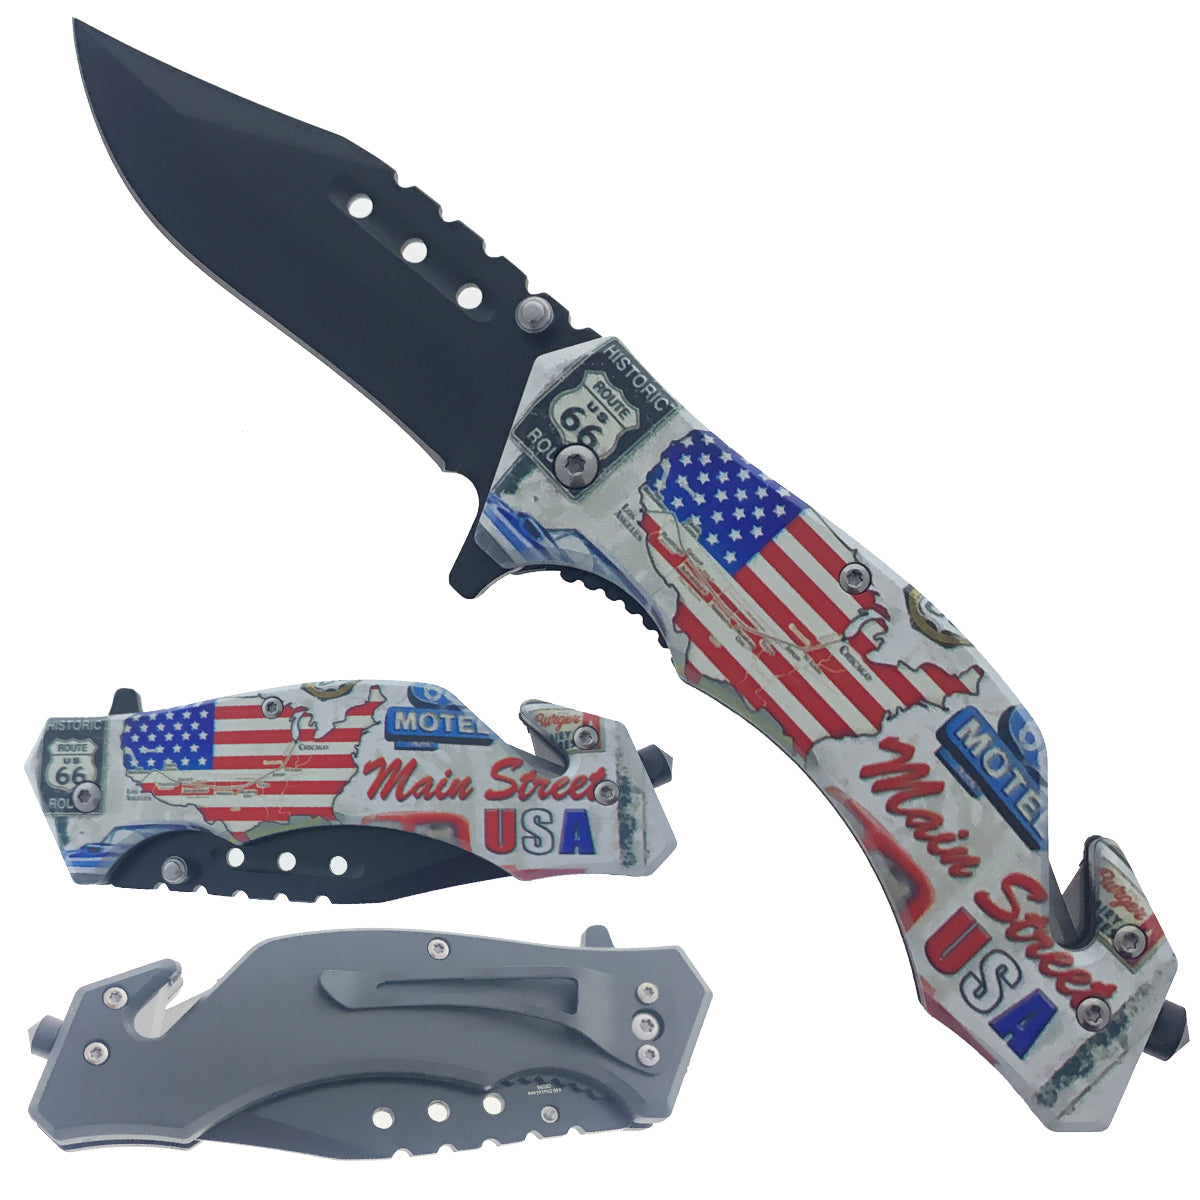 4.5" Spring Assisted American Heritage Rescue Folding Pocket Knife - Historic Route 66